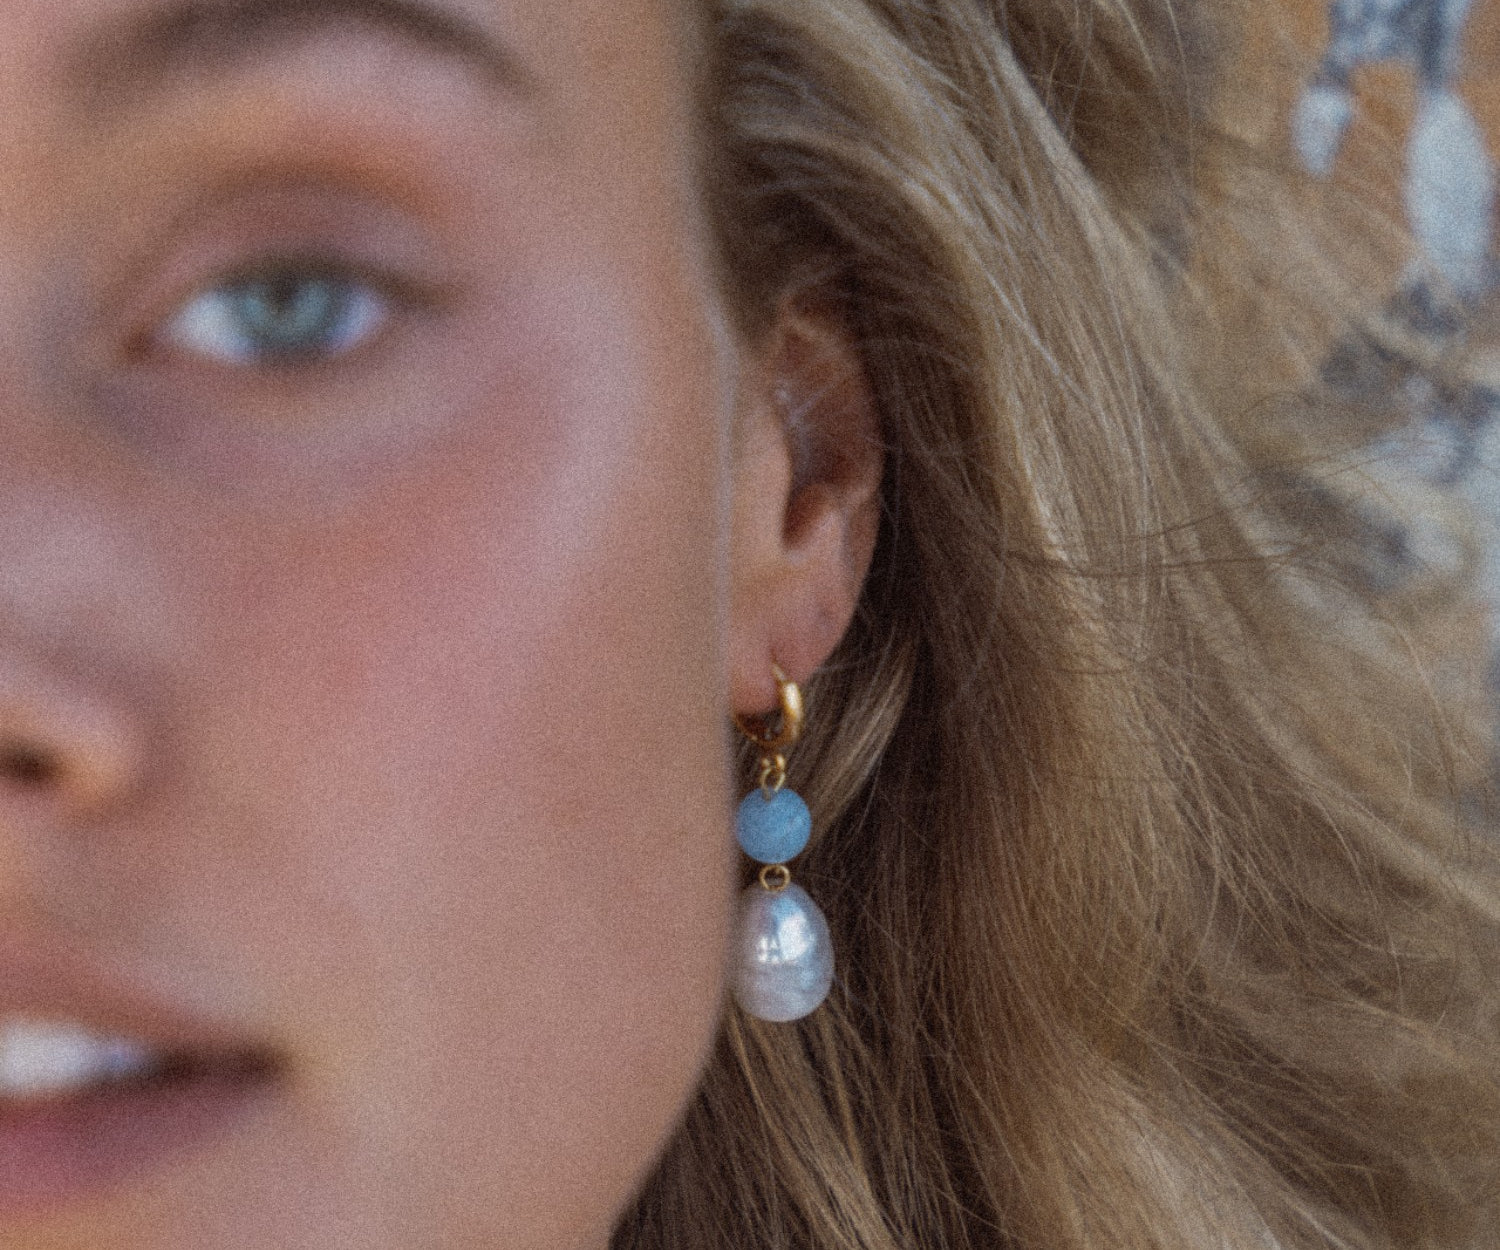 Dawn Blue Chalcedony and Pearl Drop Huggie Earrings | Sustainable Jewellery by Ottoman Hands